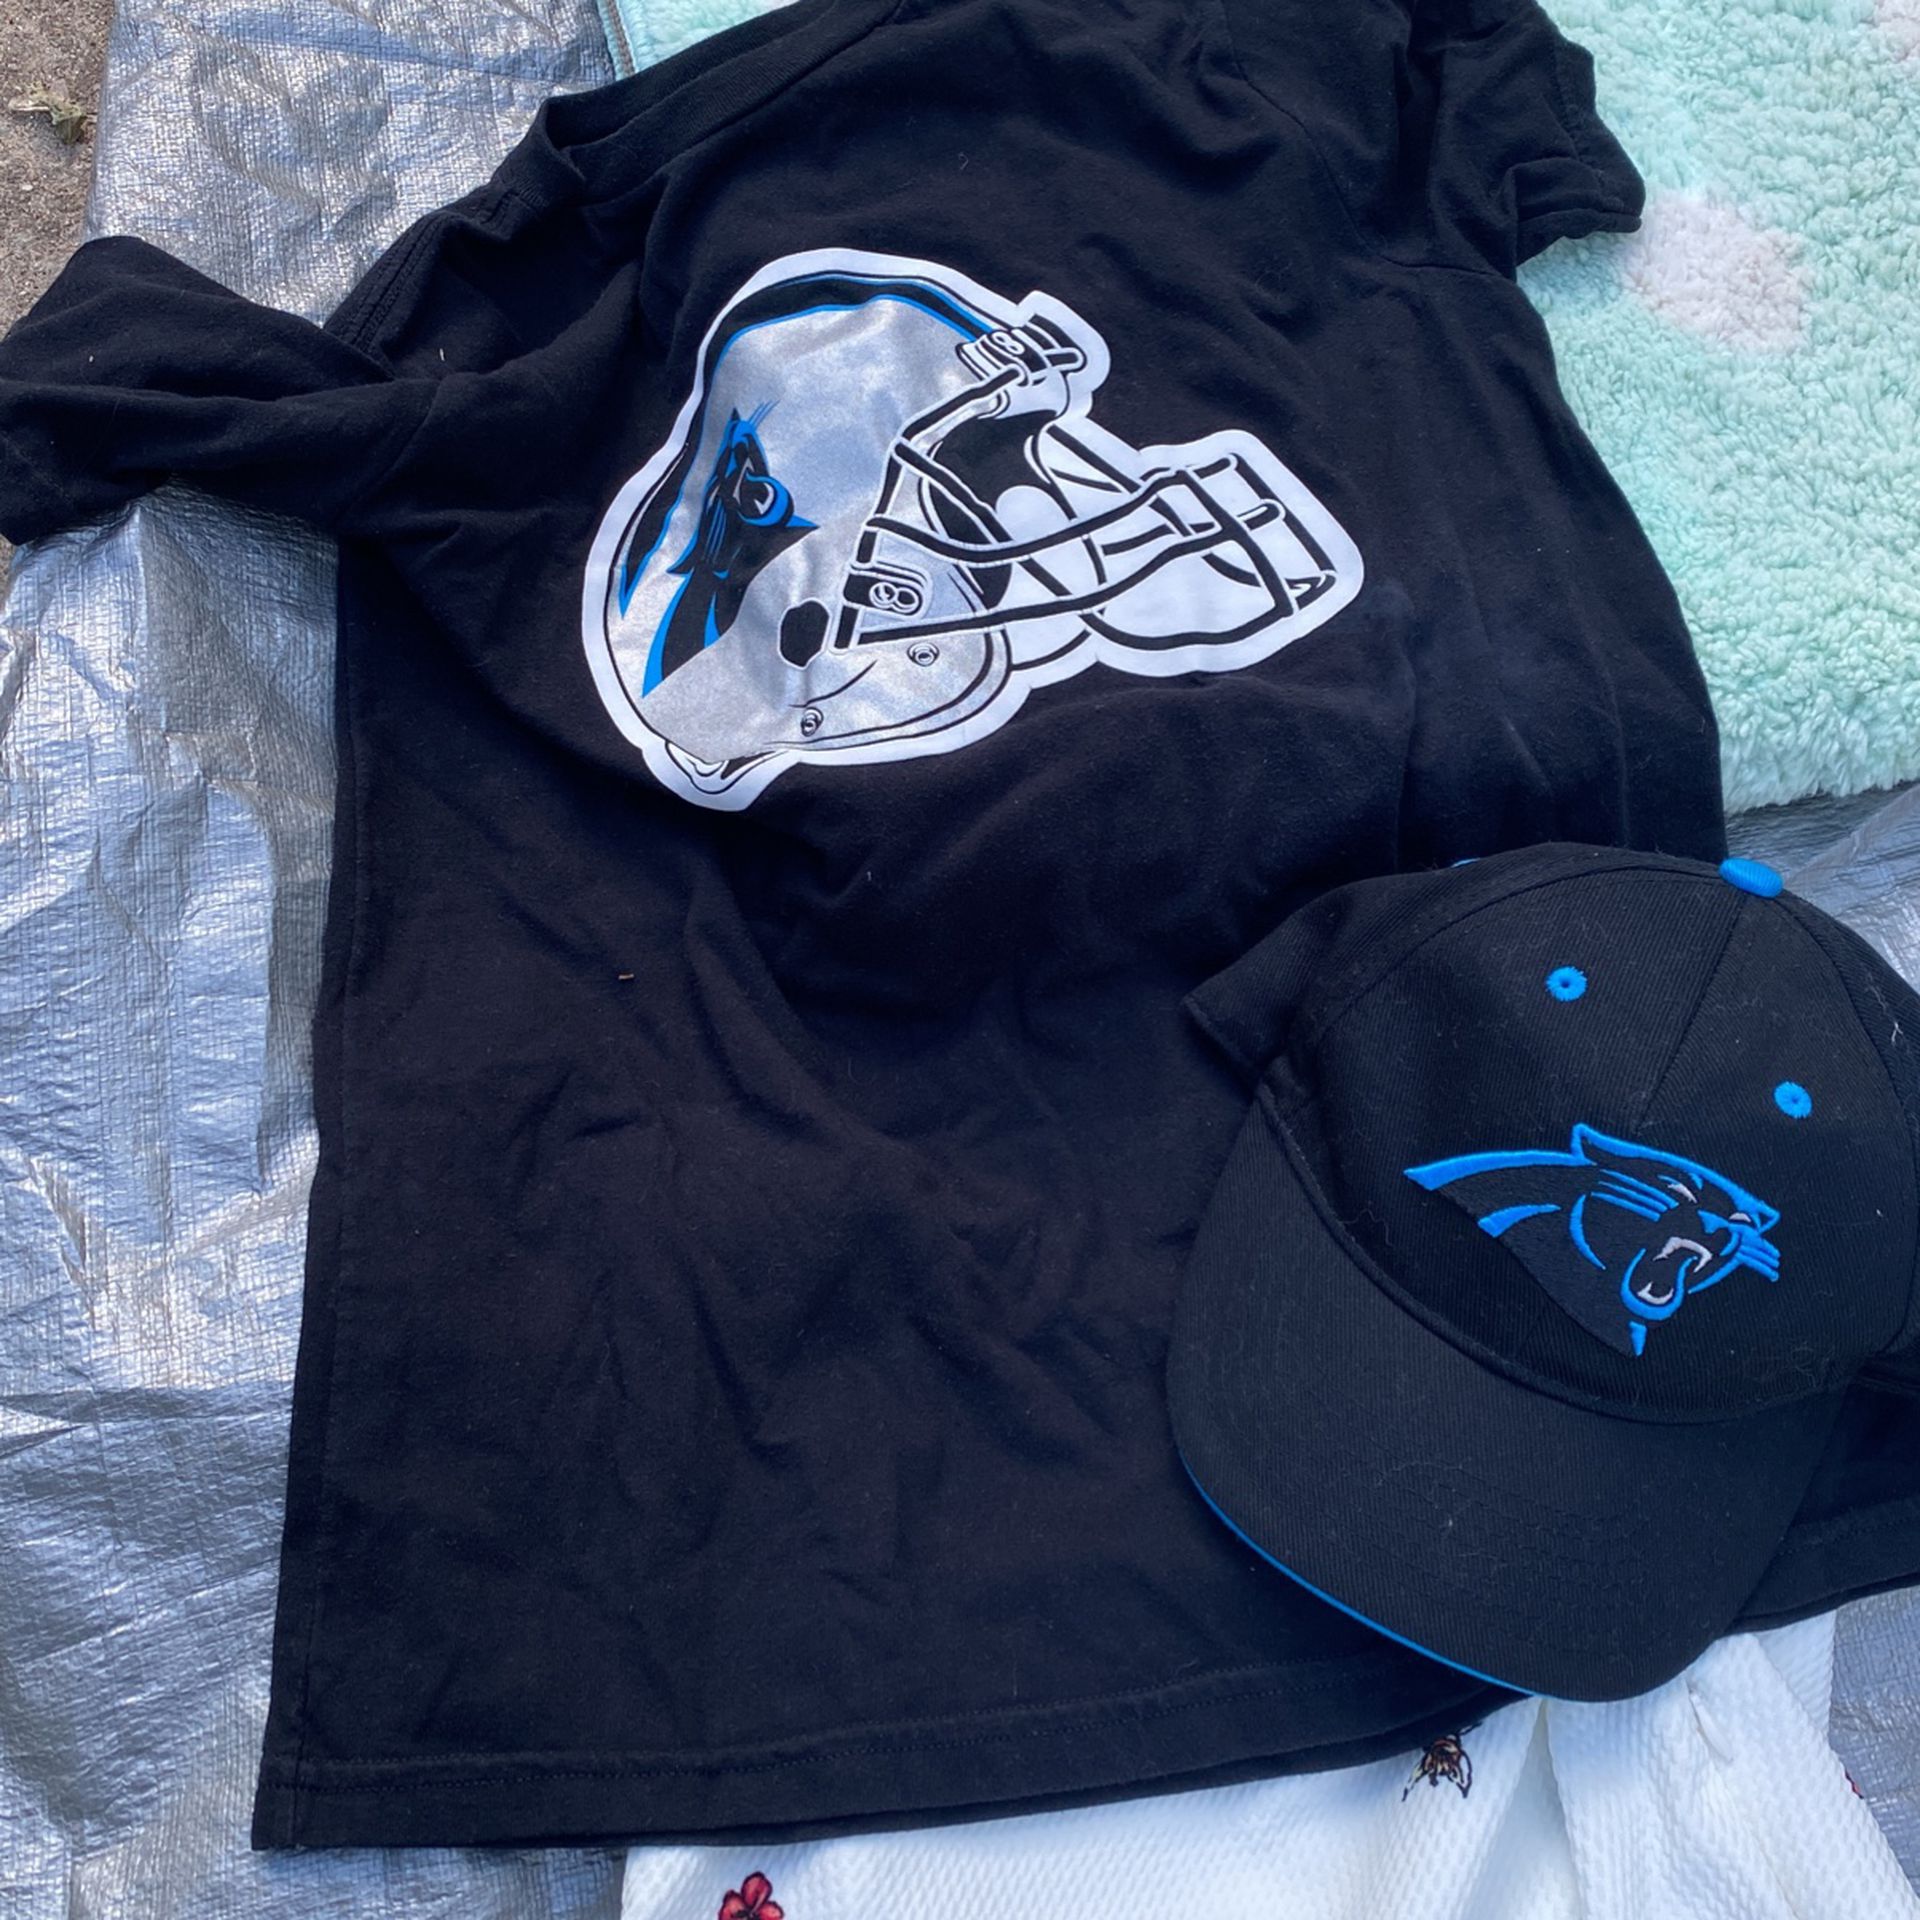 Panthers Kids Size Hat And Tshirt